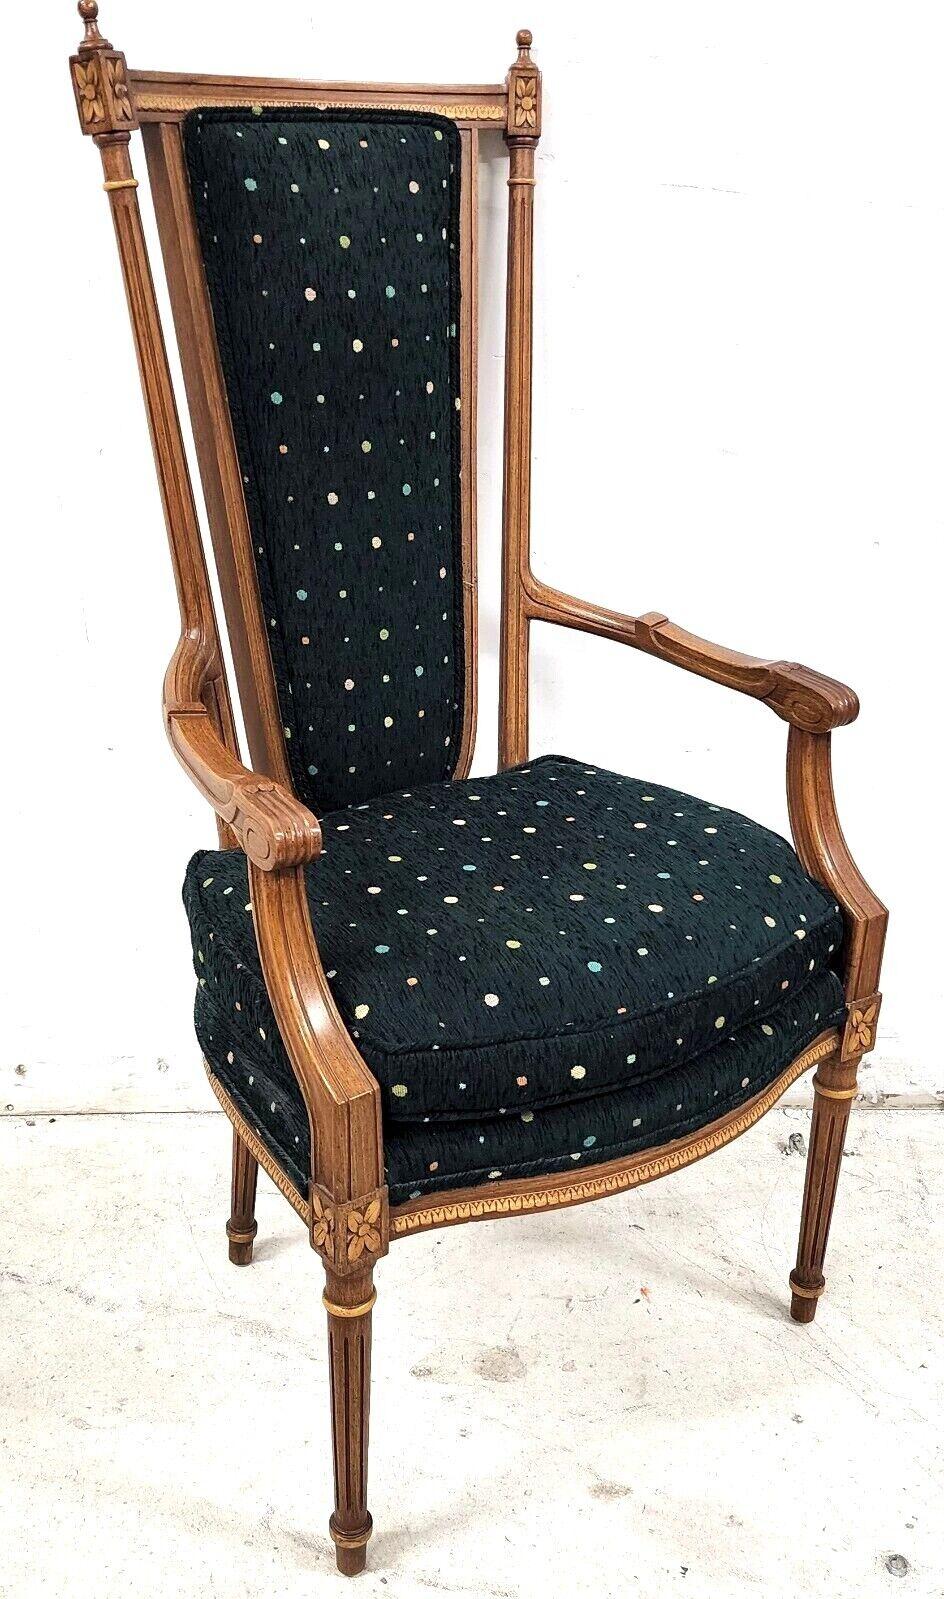 Offering one of our recent palm beach estate fine furniture acquisitions of a
vintage Italian renaissance desk dining accent armchair.
Featuring a plush Hunter Green cotton fabric and lots of wonderful carvings throughout.

Approximate